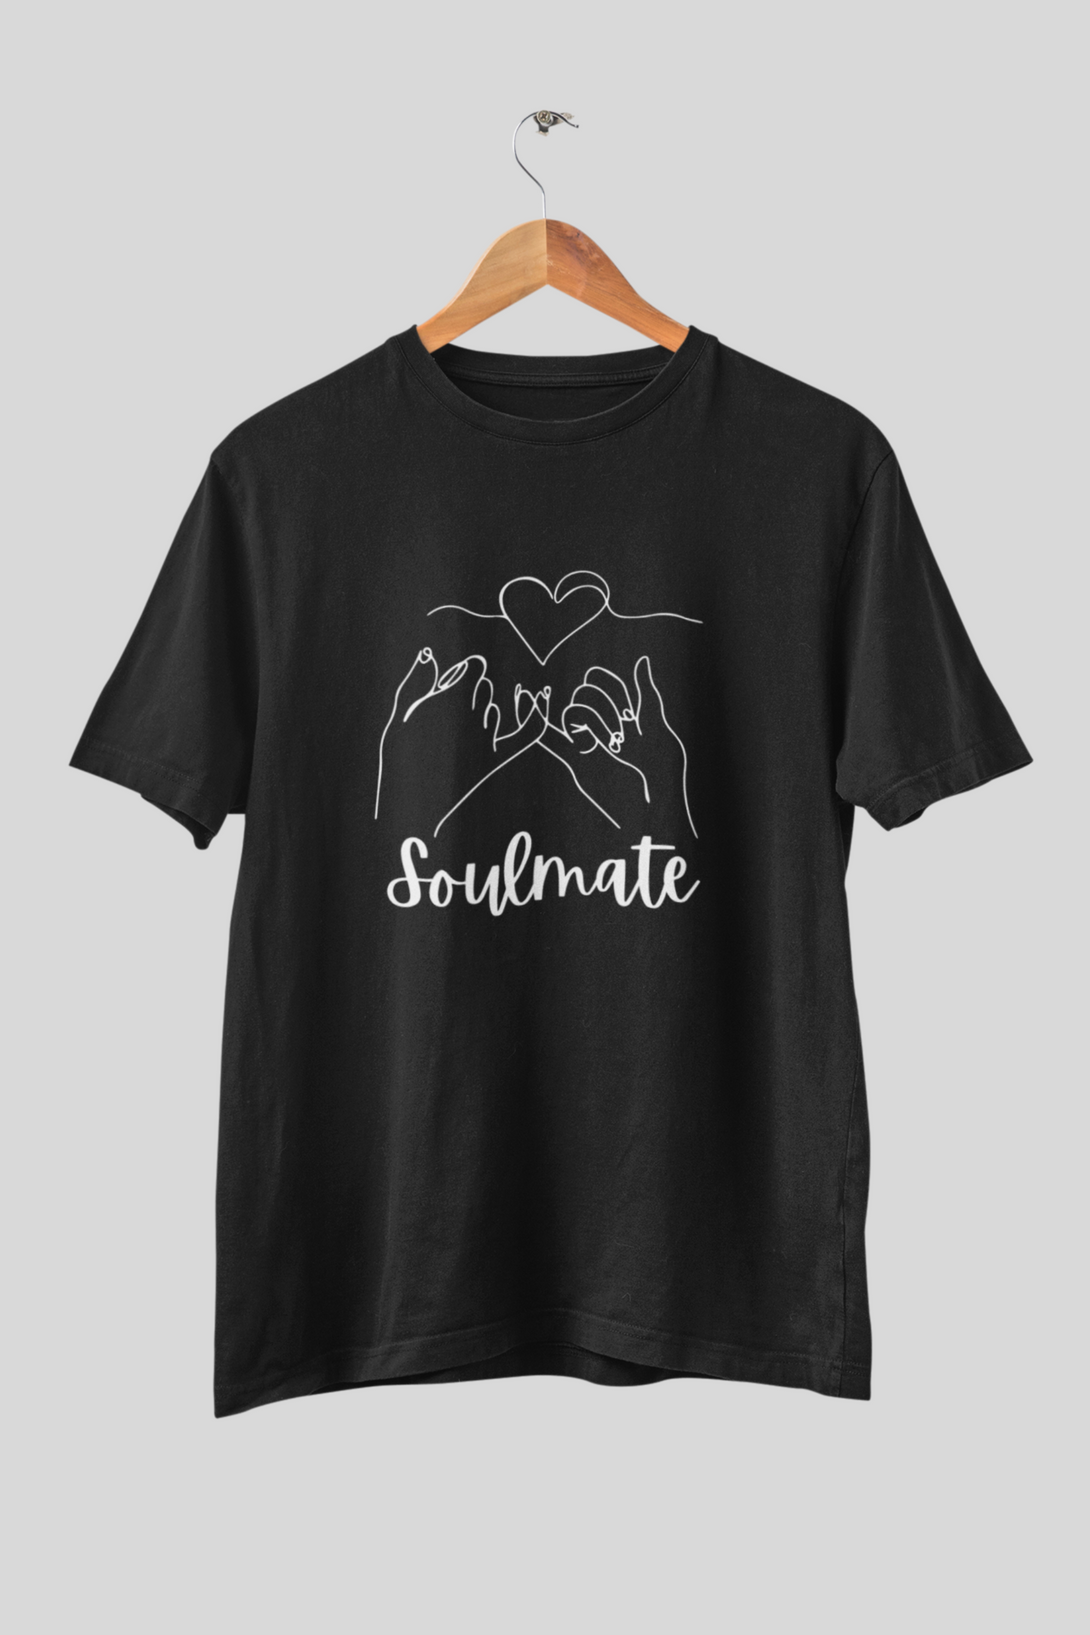 Soulmate Forever Couple T Shirt - WowWaves - 4